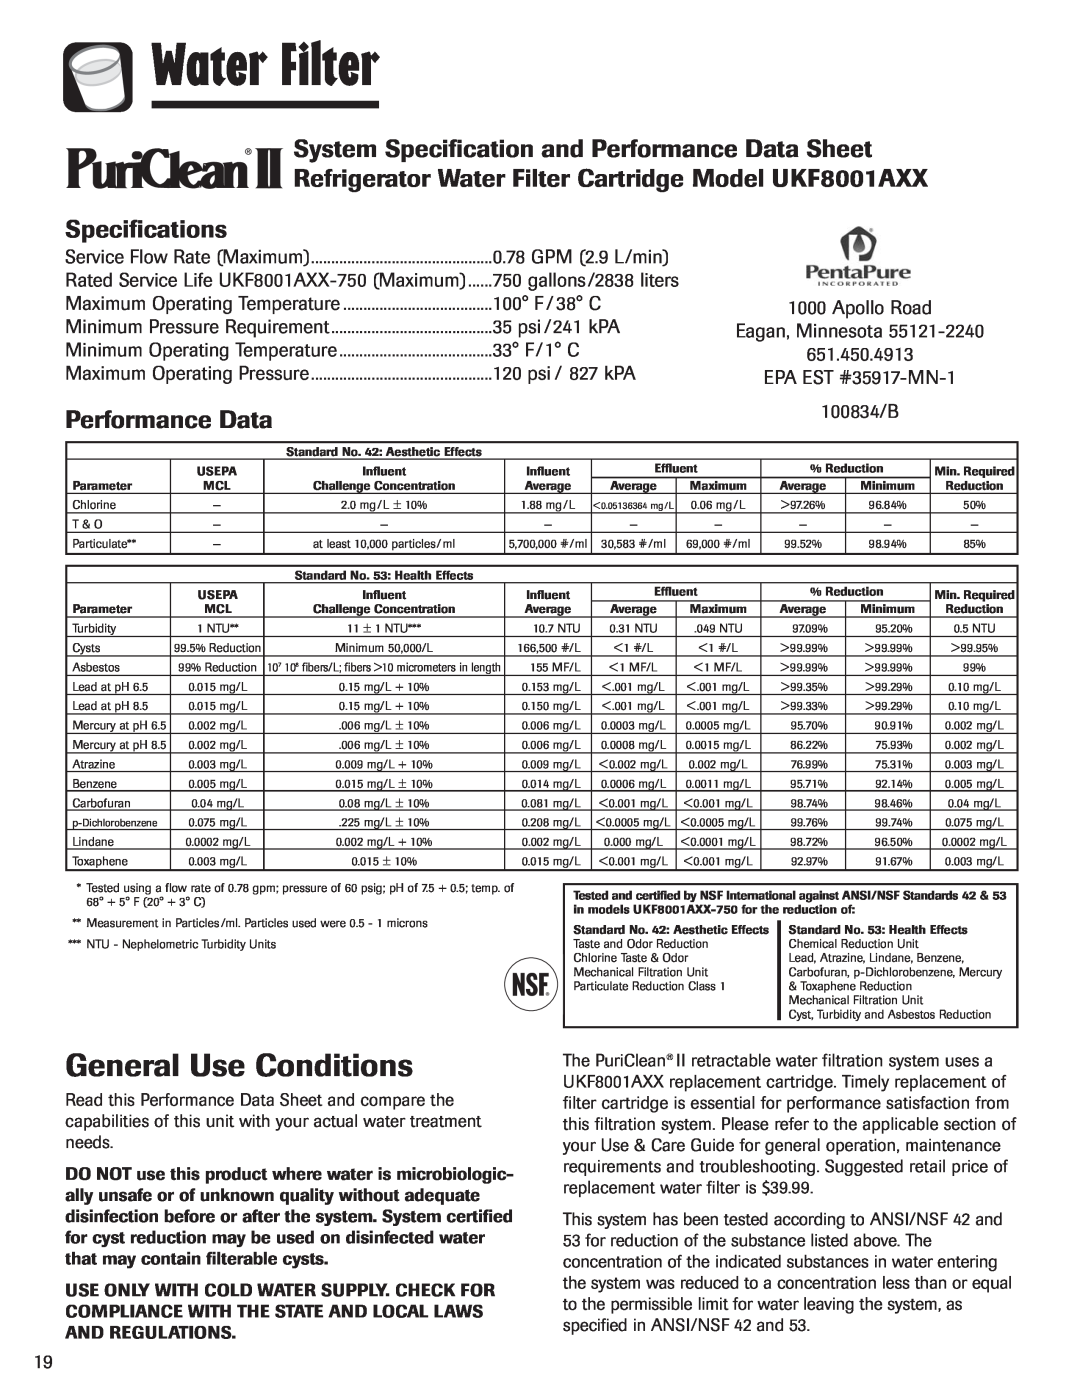 Amana ASD2624HEQ General Use Conditions, System Specification and Performance Data Sheet, Specifications, Water Filter 